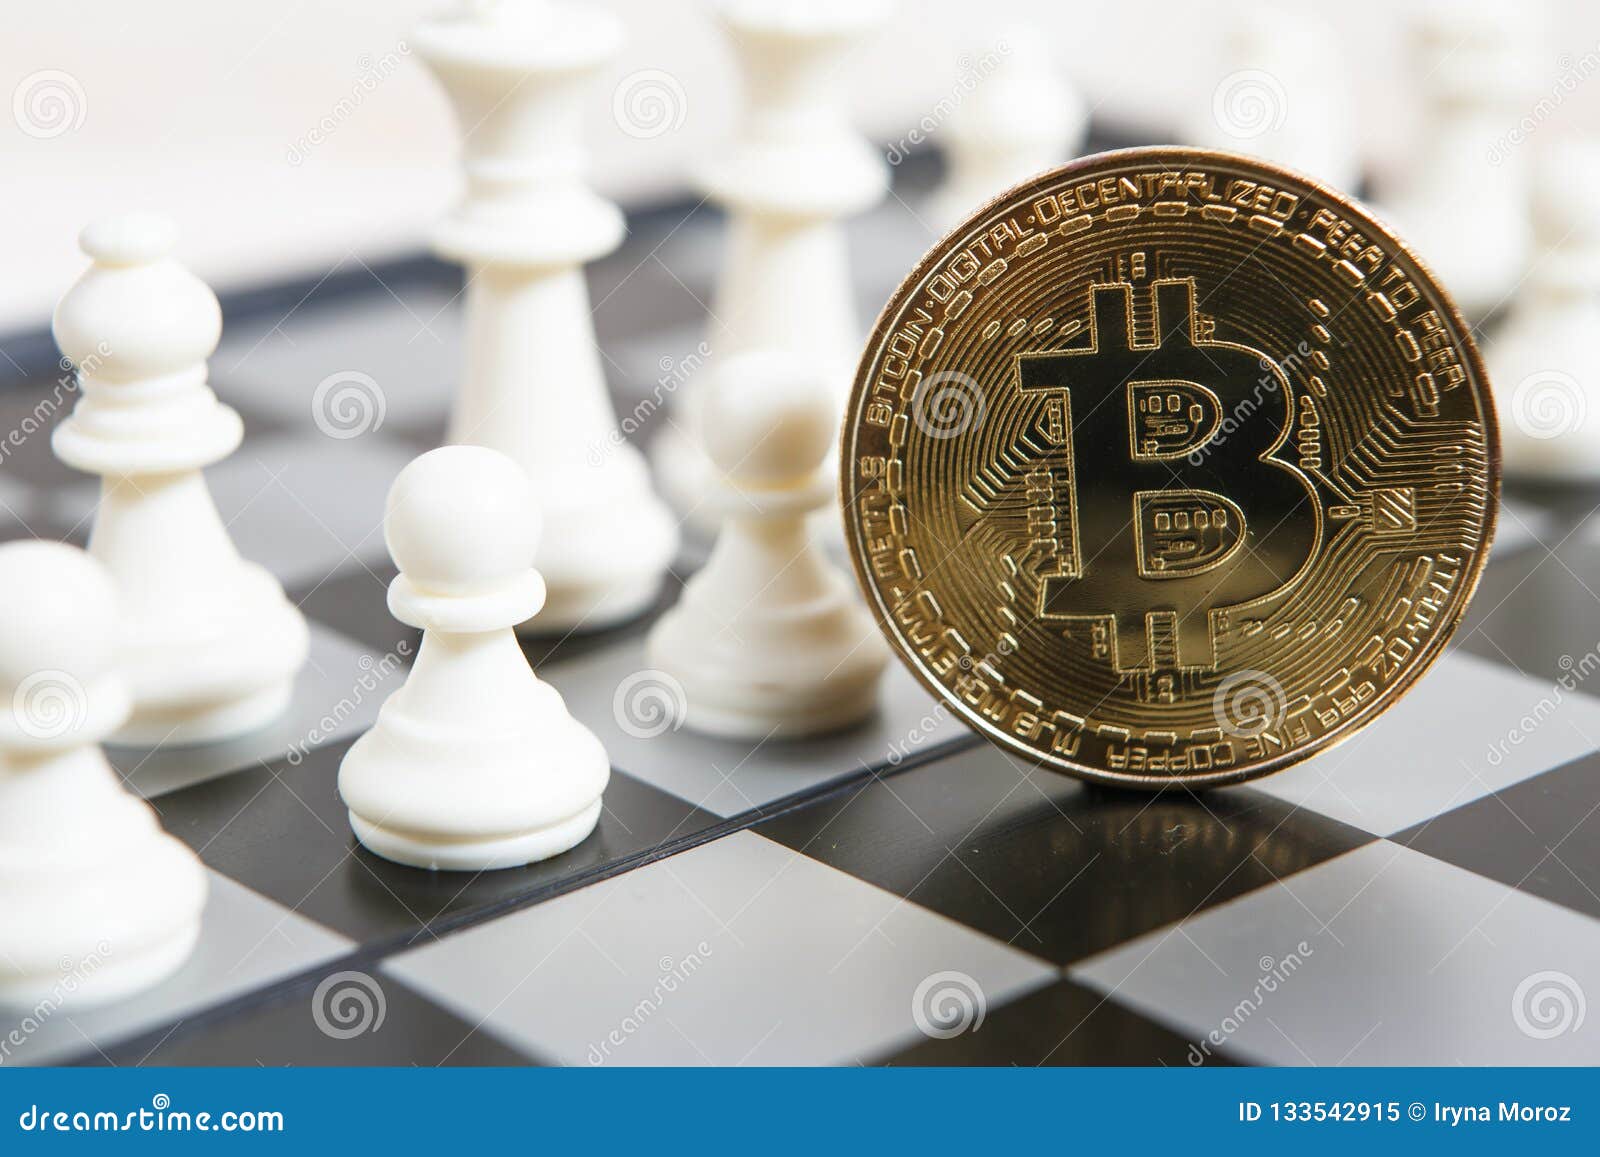 what is chess coin crypto